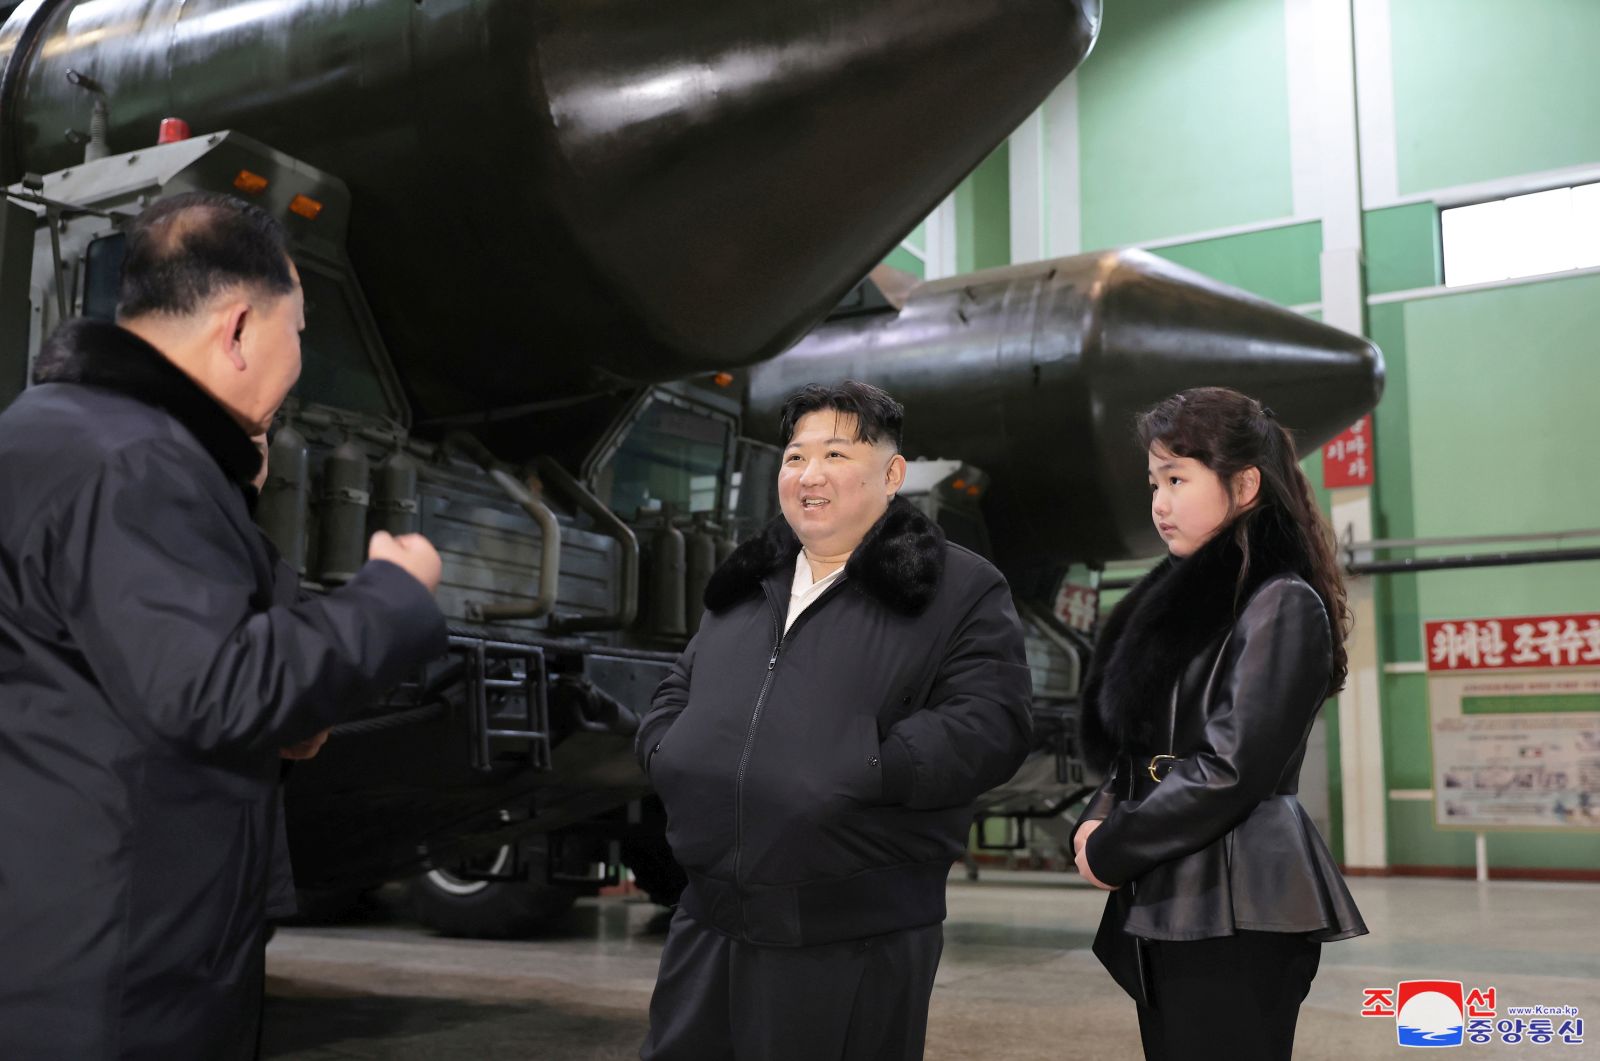 epa11057956 An undated photo released by the official North Korean Central News Agency (KCNA) on 05 January 2024 shows North Korean leader Kim Jong Un and his daughter Ju Ae inspecting a missile launcher production facility in an undisclosed location in North Korea. According to KCNA, Kim Jong Un calls for expanded production of 'various TELs (transporter erector launcher) for tactical and strategic weapon' for the country to be 'firmly prepared for a military showdown with the enemy'.  EPA/KCNA   EDITORIAL USE ONLY  EDITORIAL USE ONLY